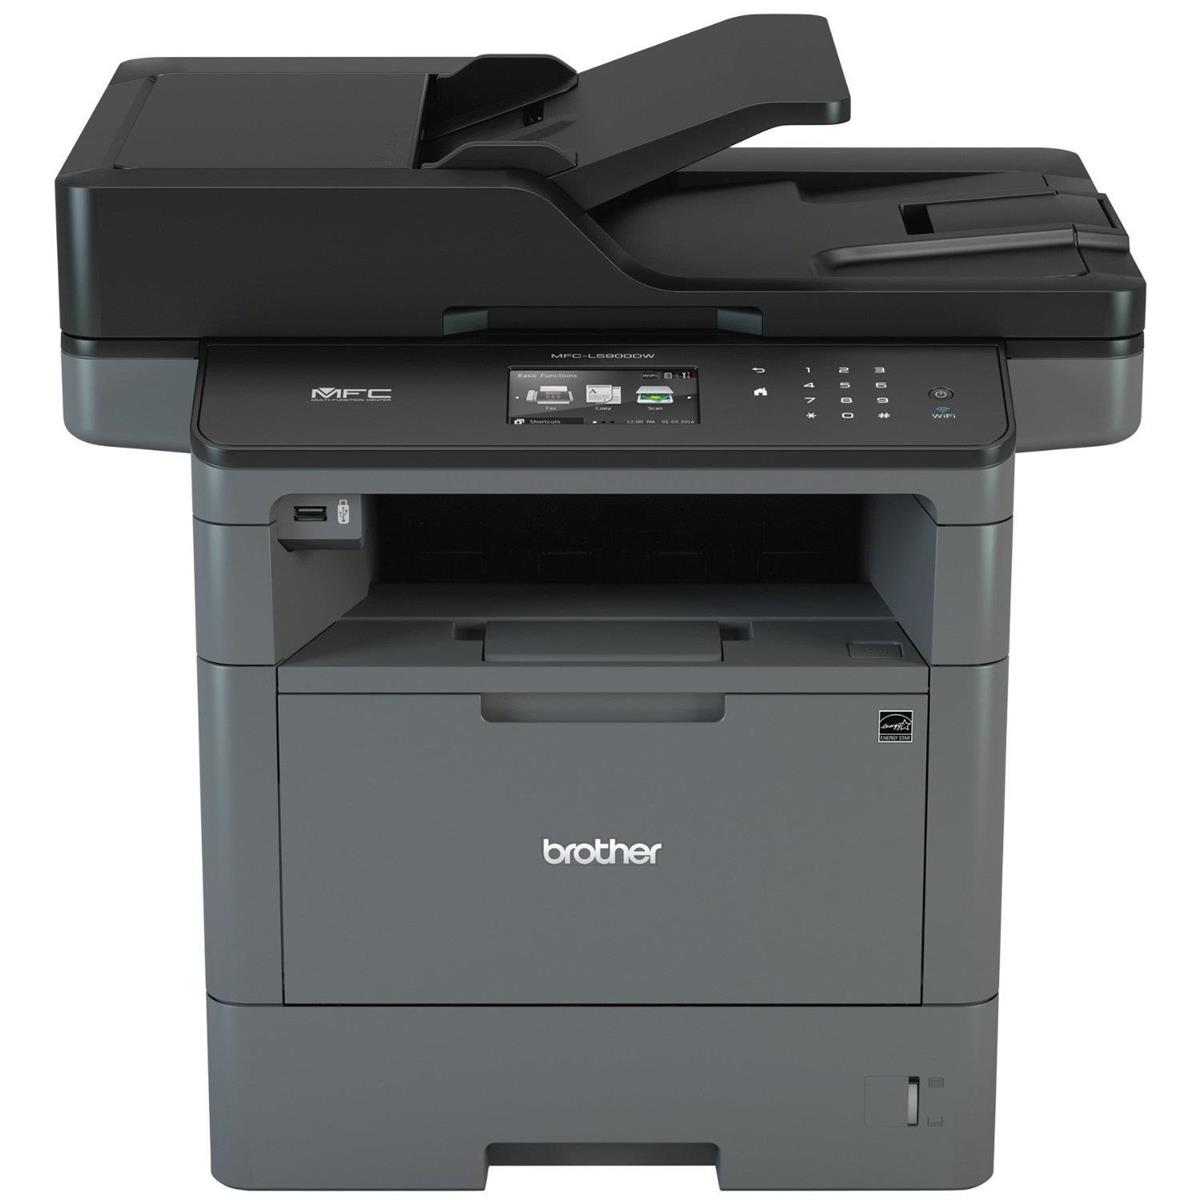 Image of Brother MFC-L5900DW All-in-One Monochrome Laser Printer